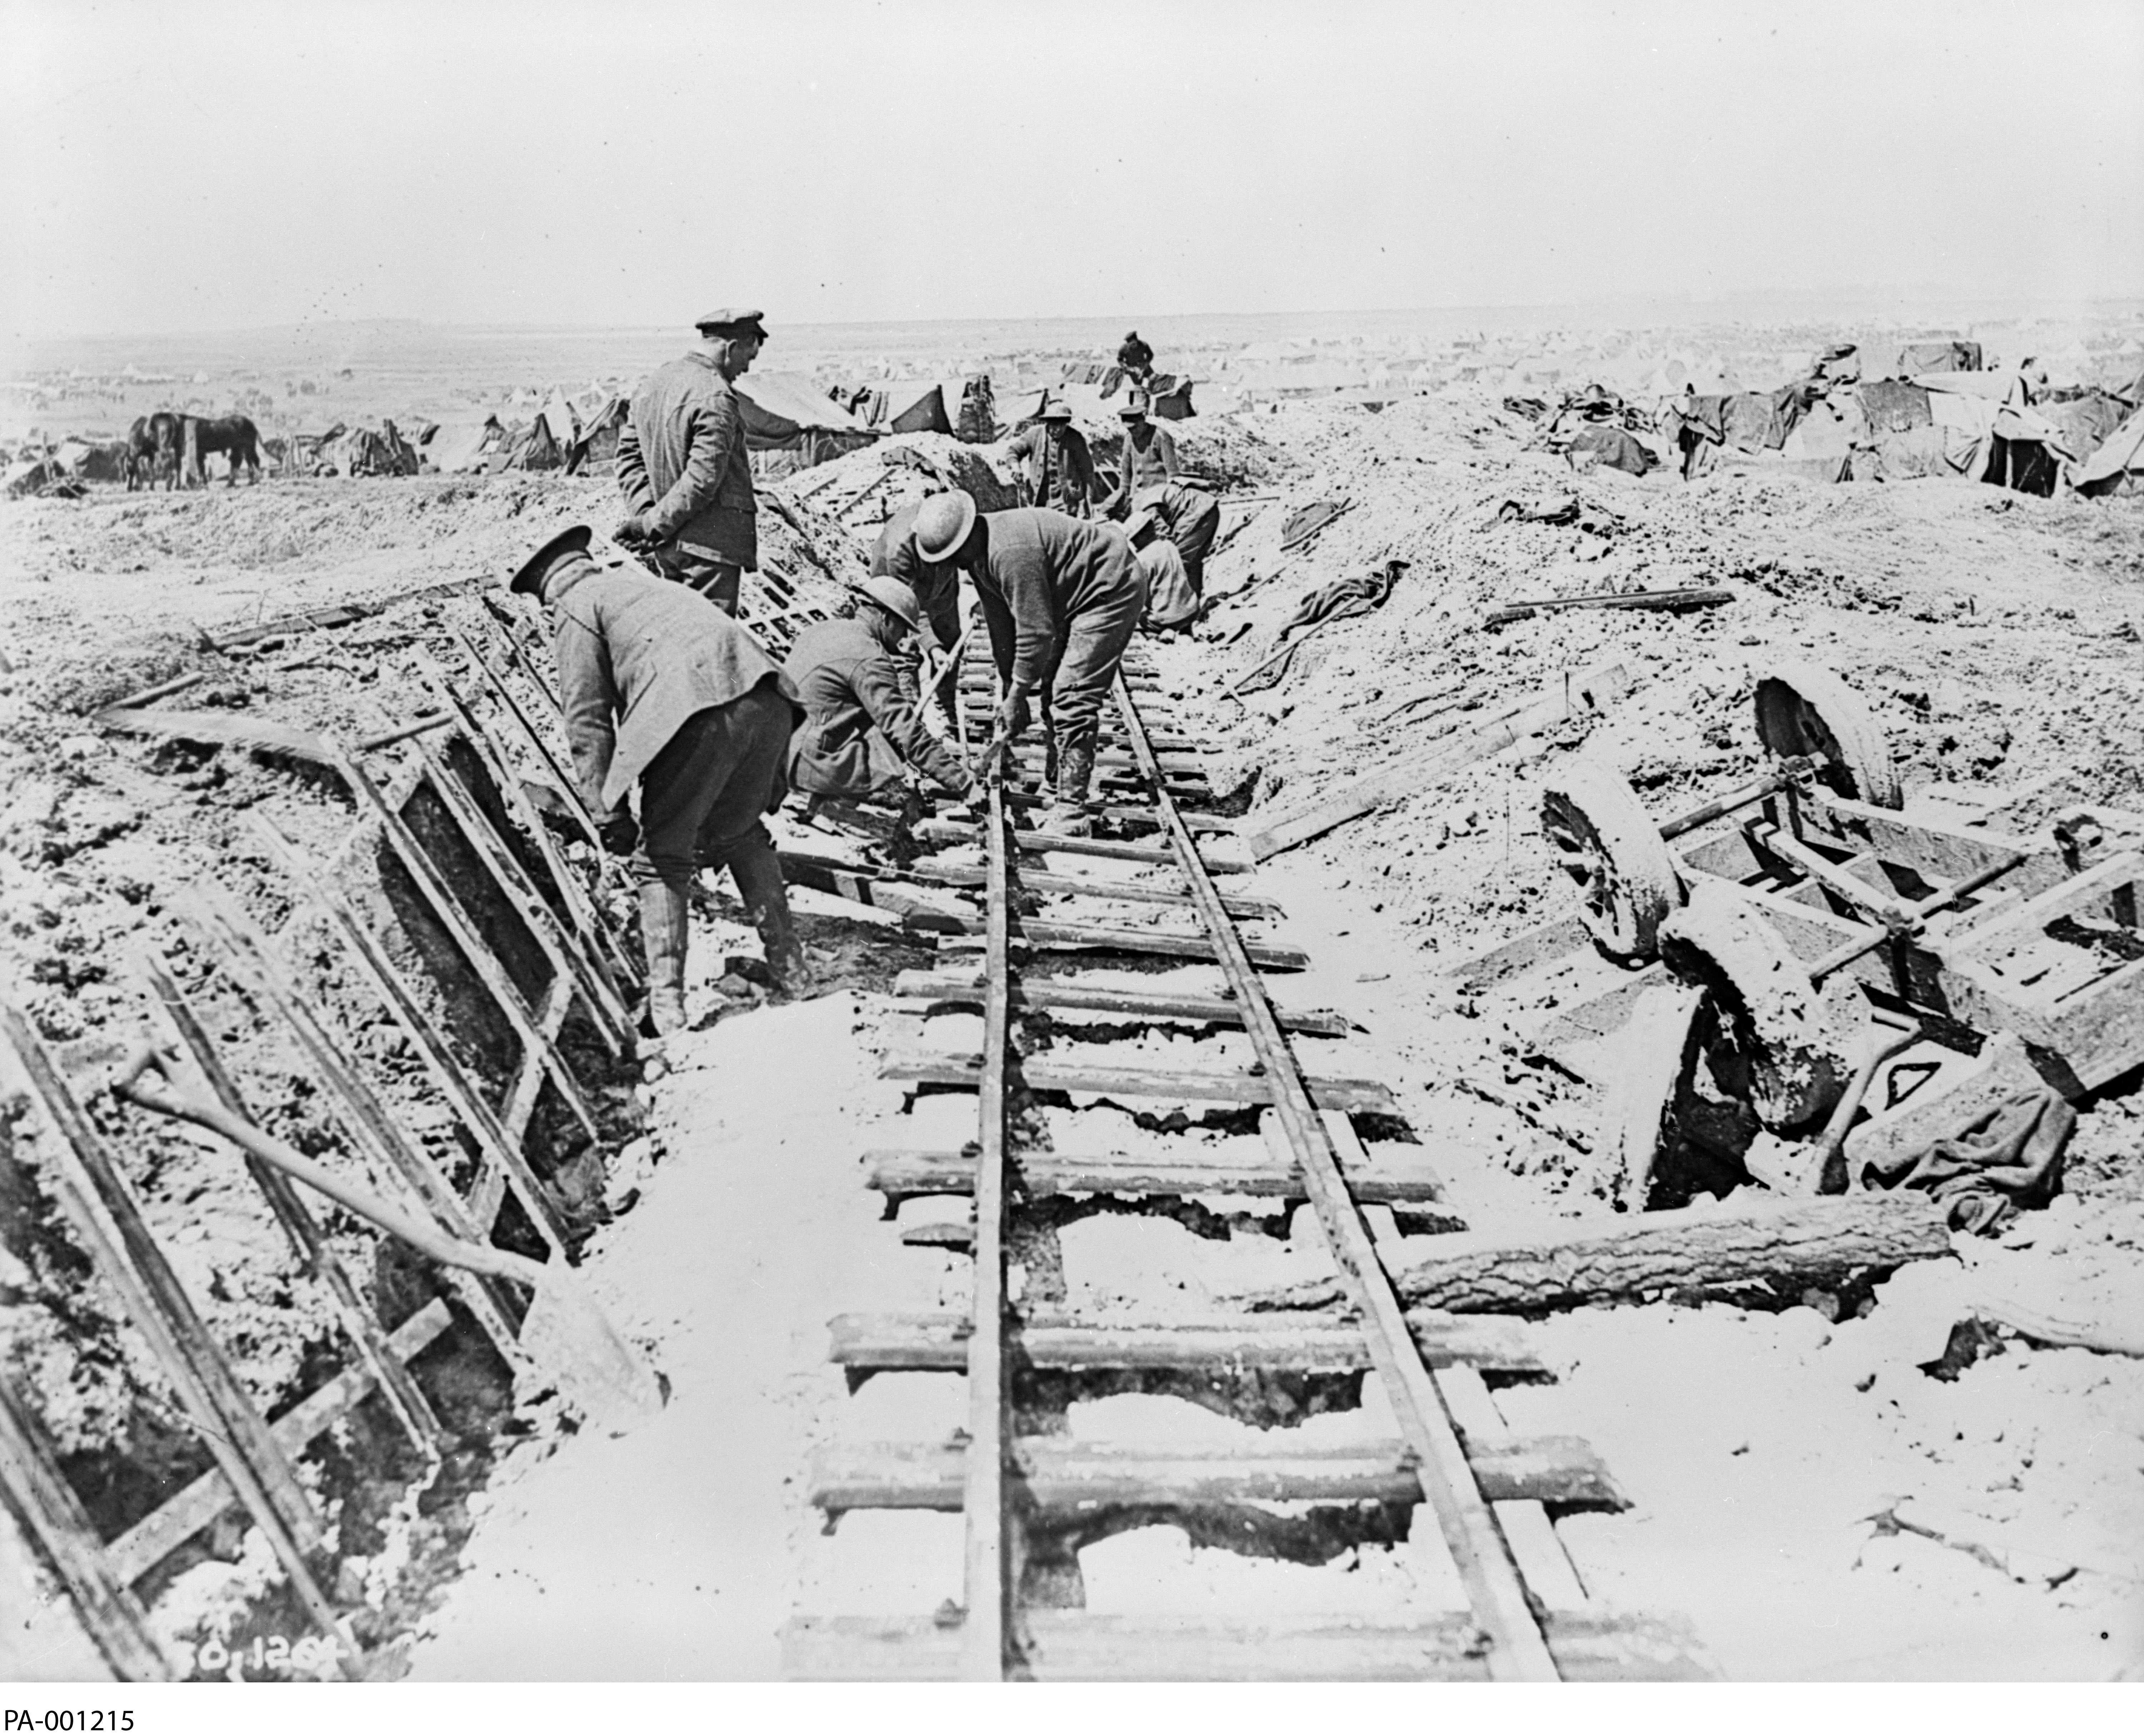 Black and white photograph. In the foreground, on muddy ground, 4 men lay pre-assembled rail tracks. A 5th man, dressed in civilian clothing, watches.